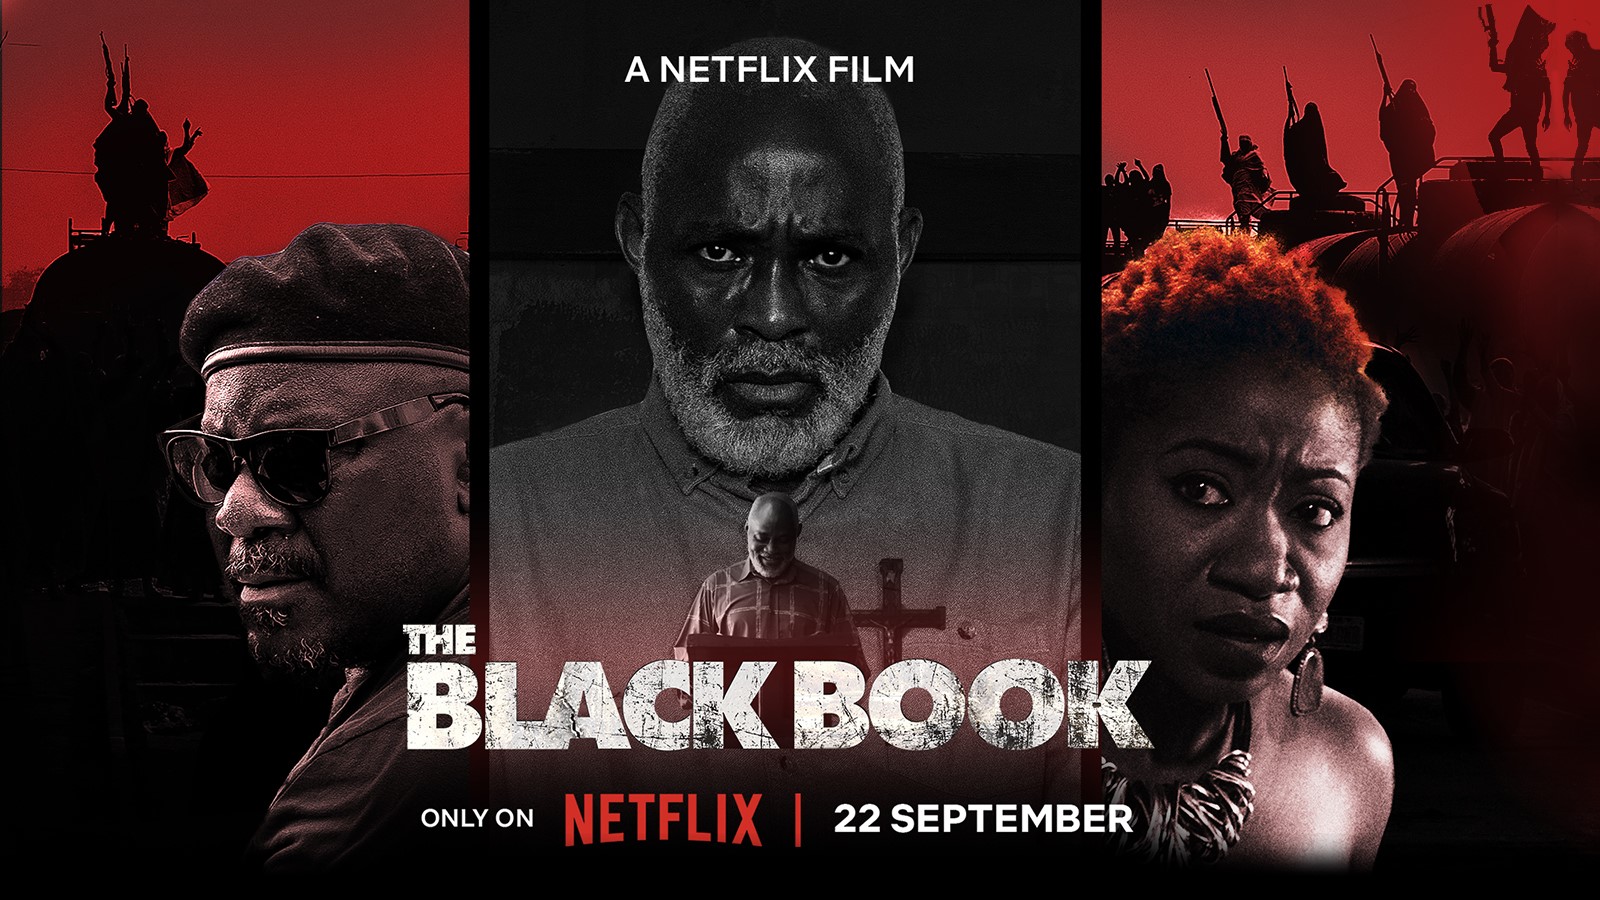 The Black Book comes to Netflix